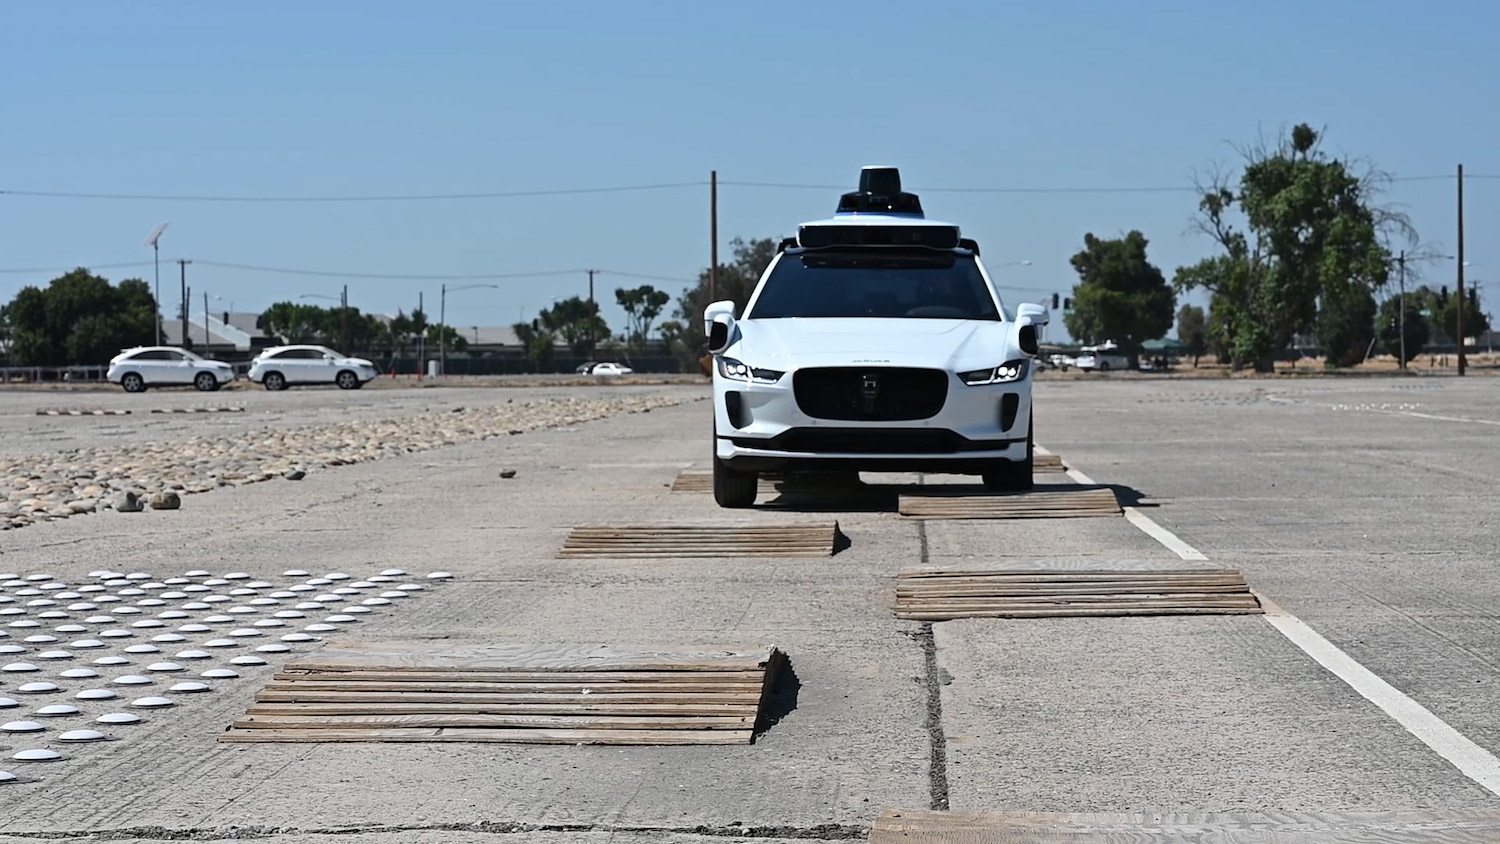 Waymo tests their vehicles in a 91-acre mock city in central California.